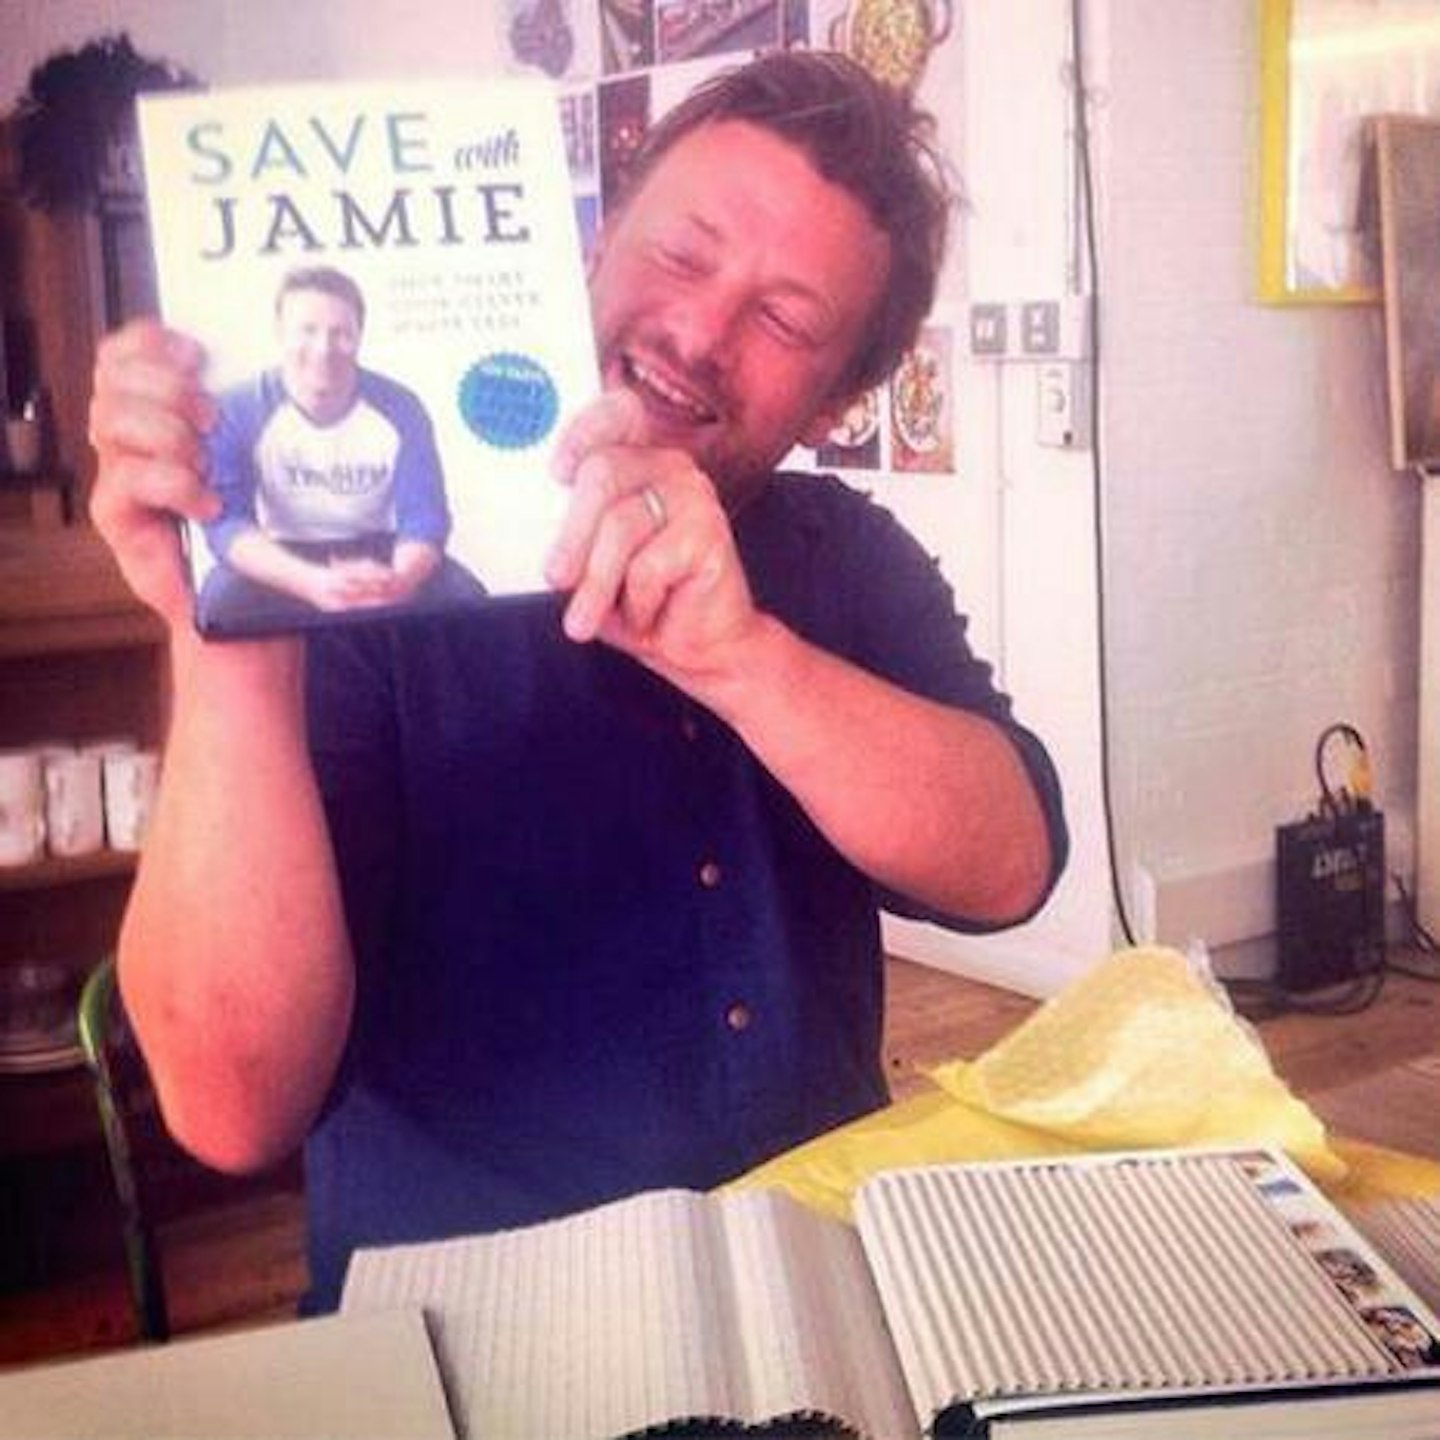 The findings come as TV chef Jamie Oliver's new project 'Save with Jamie' aims to help people cook on a budget